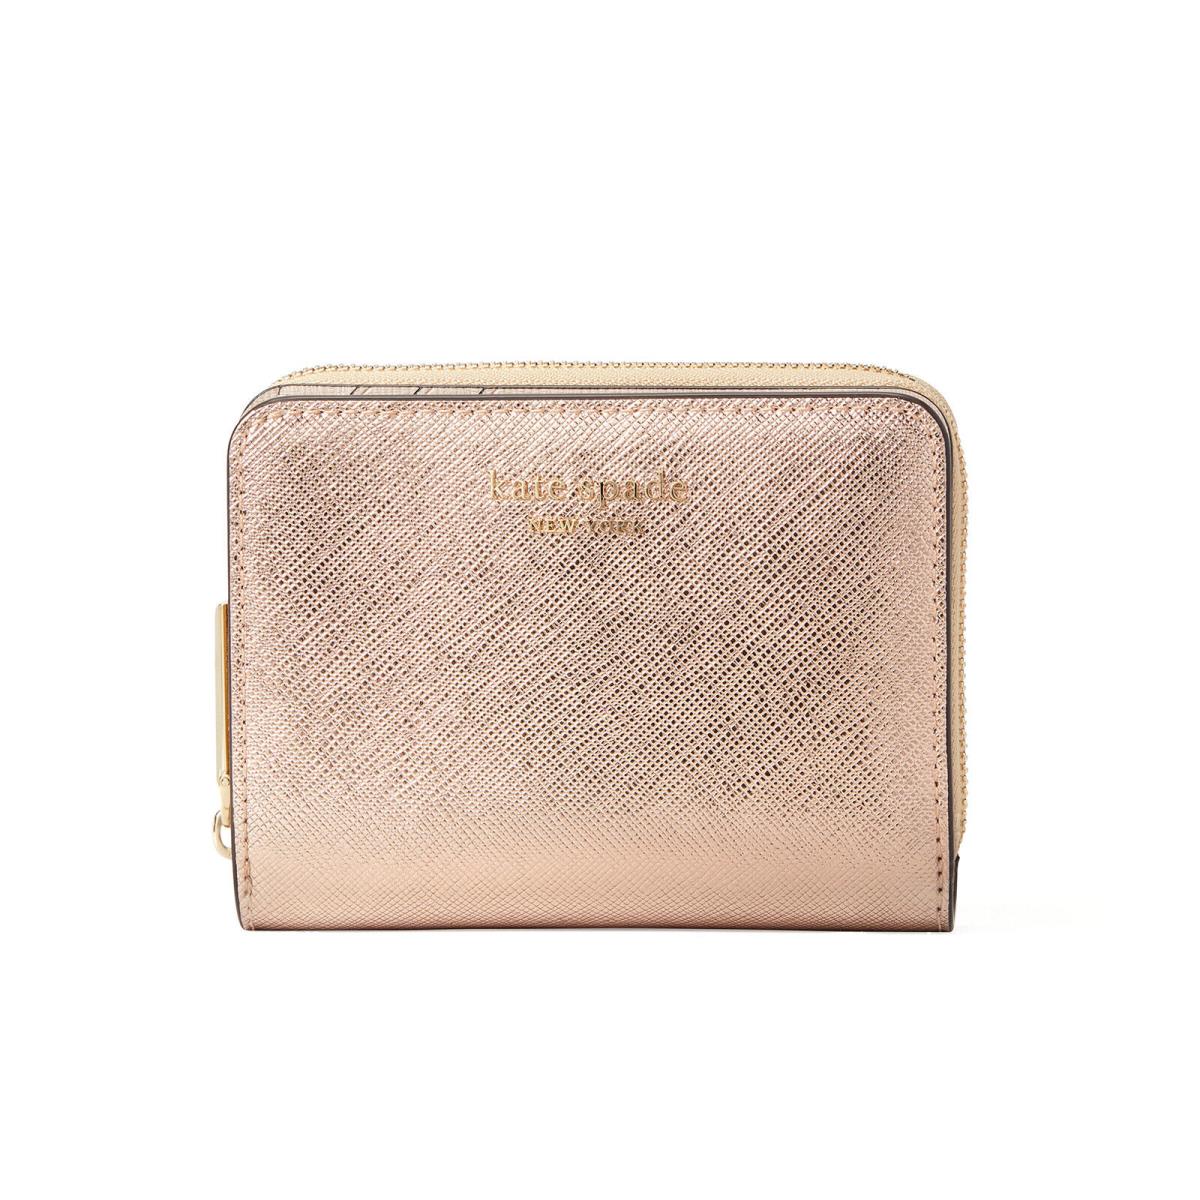 New Kate Spencer Metallic Compact Leather Zip Wallet Rose Gold Rosegold